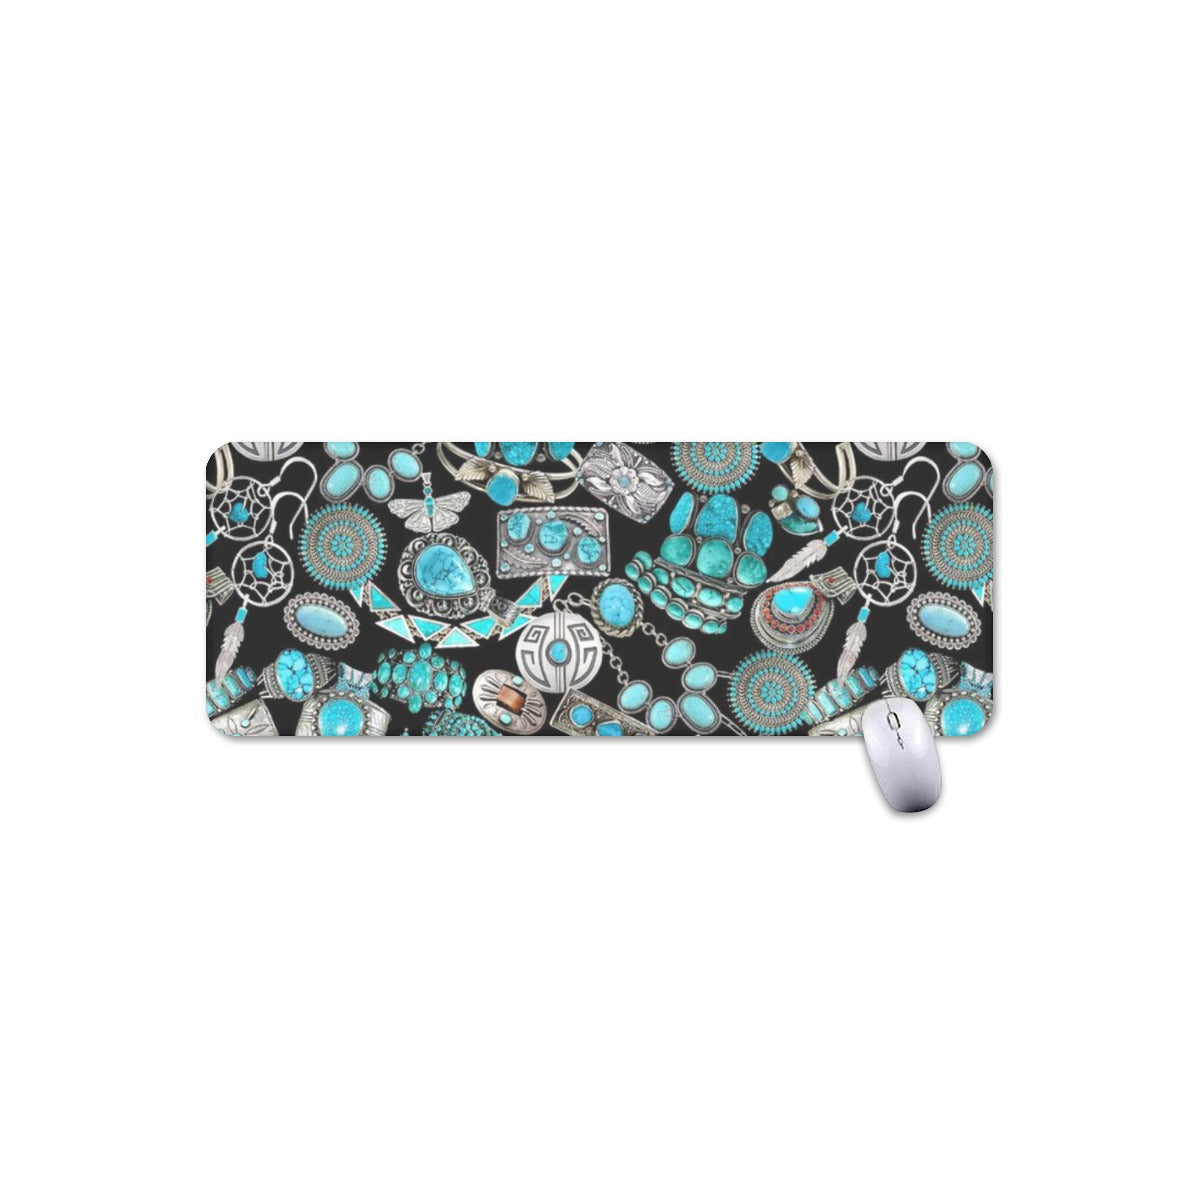 Turquoise Lovers Mouse Pad Plus Size